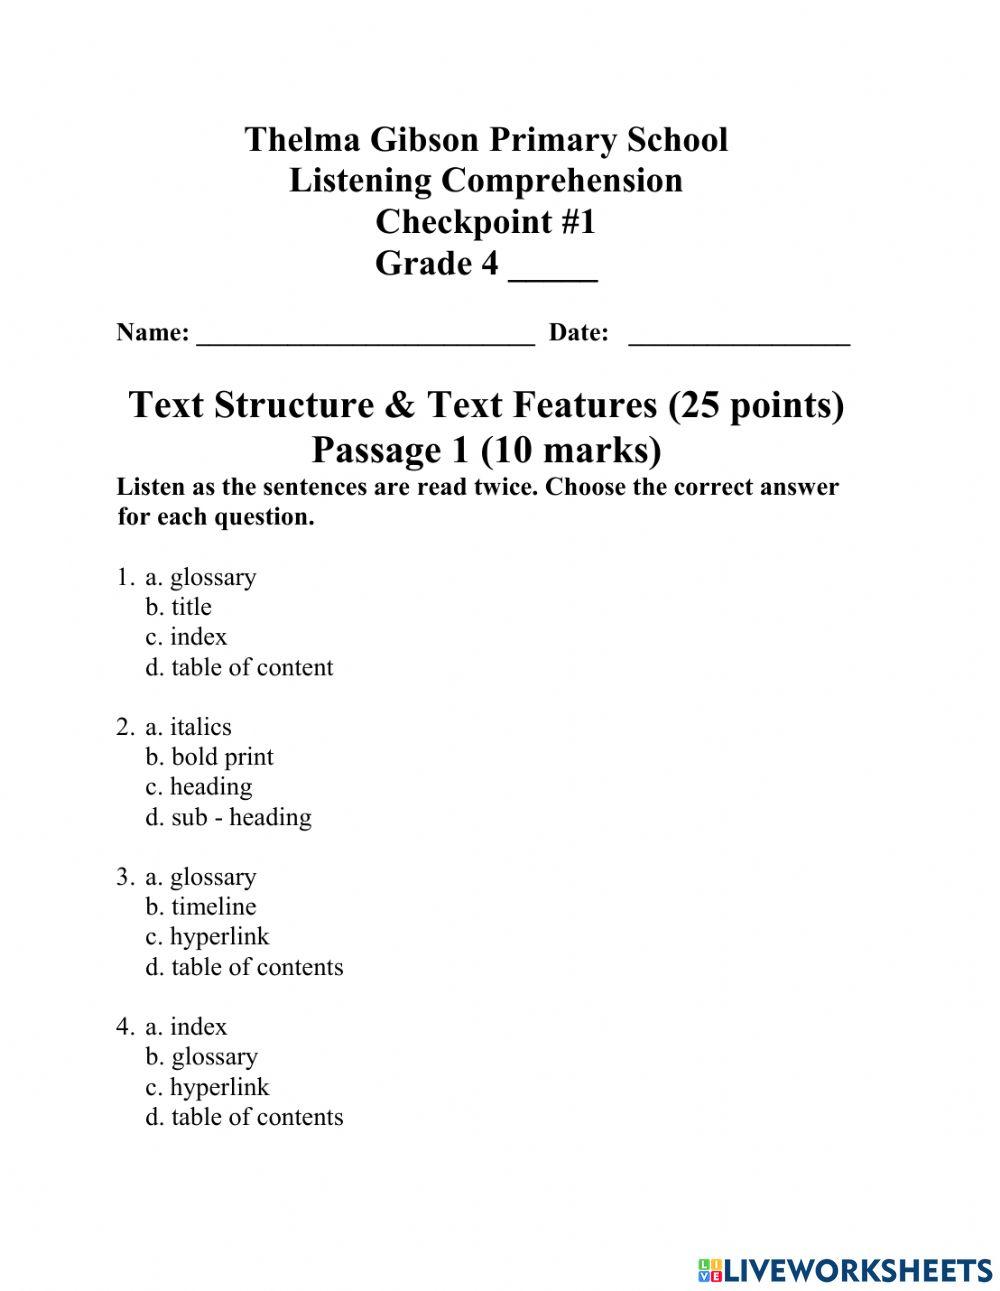 Text Structures & Text Features